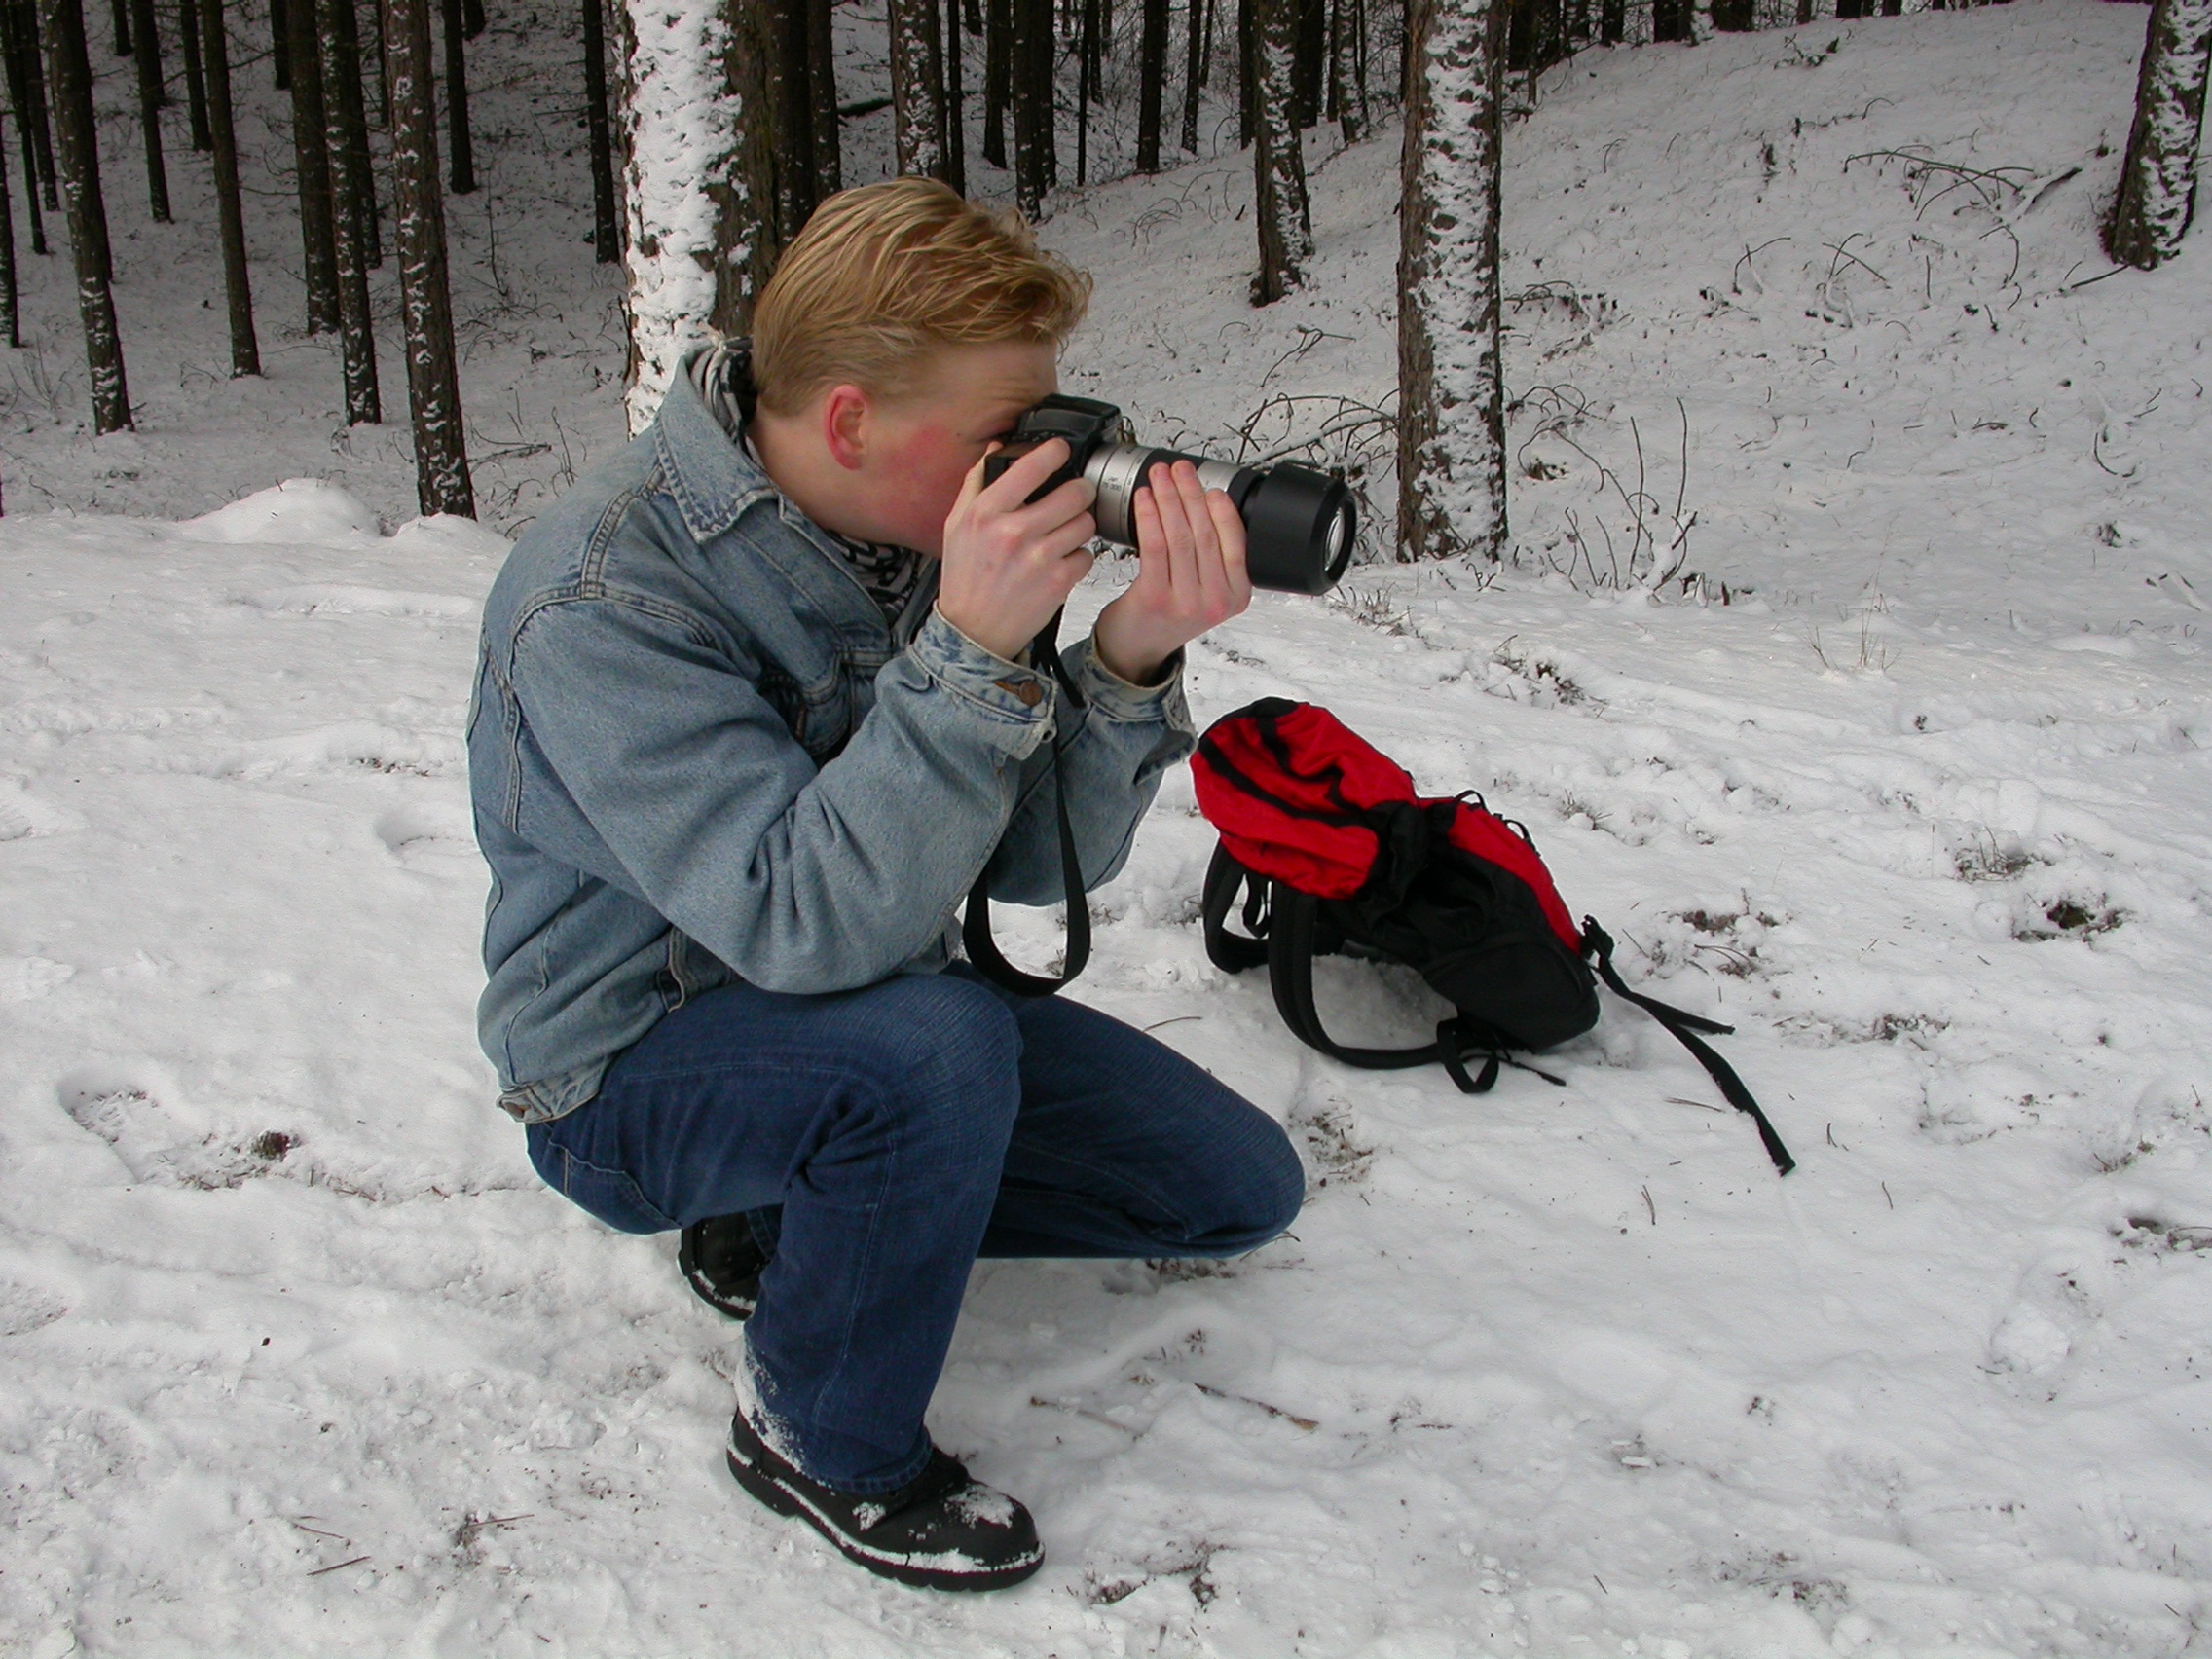 paul photographer photographing winter snow nature characters humanoids camera photocamera shoot shooting backpack